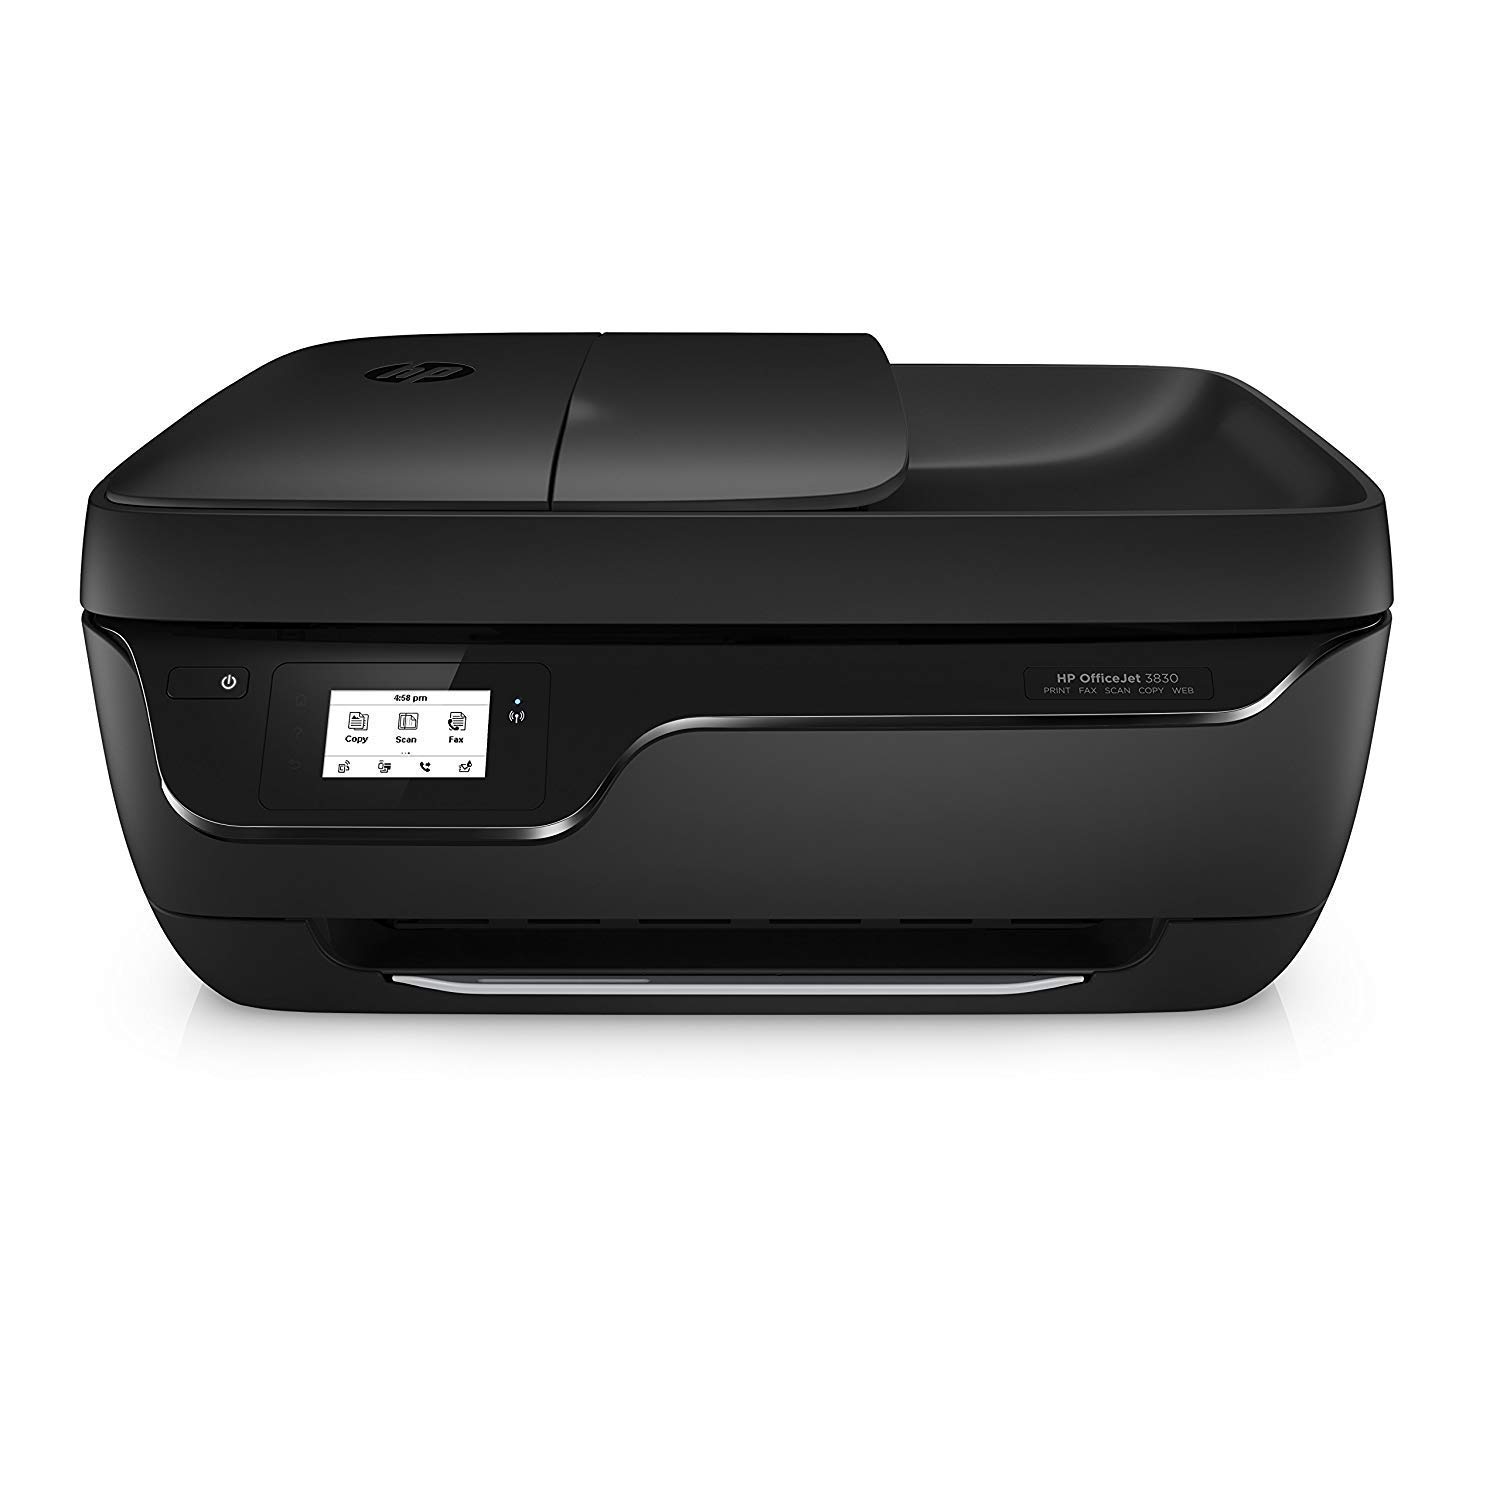 HP OfficeJet 3830 All-in-One Wireless Printer Review